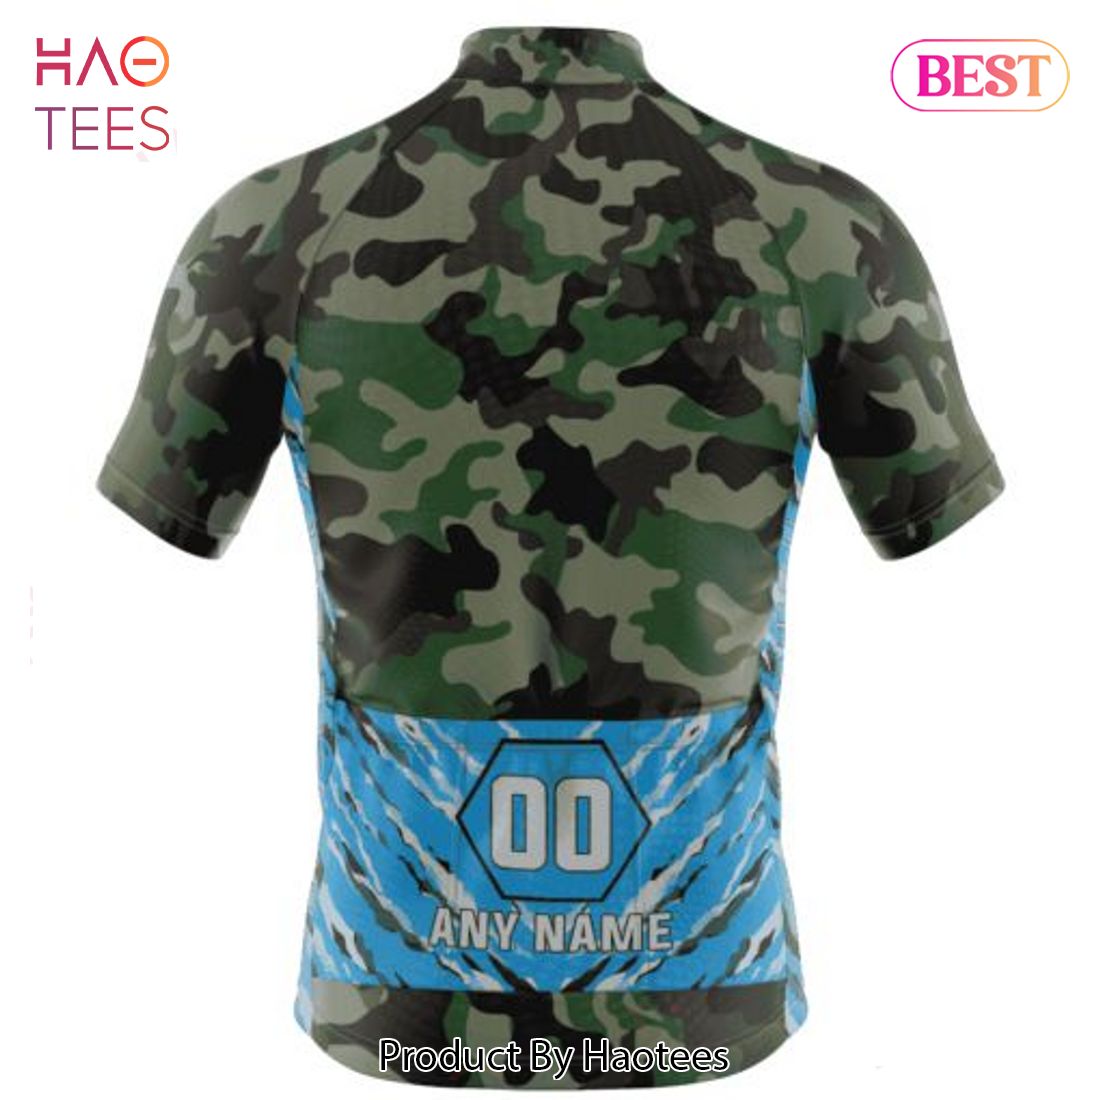 HOT TREND NFL Carolina Panthers Special Camo Design Cycling Jersey Hoodie